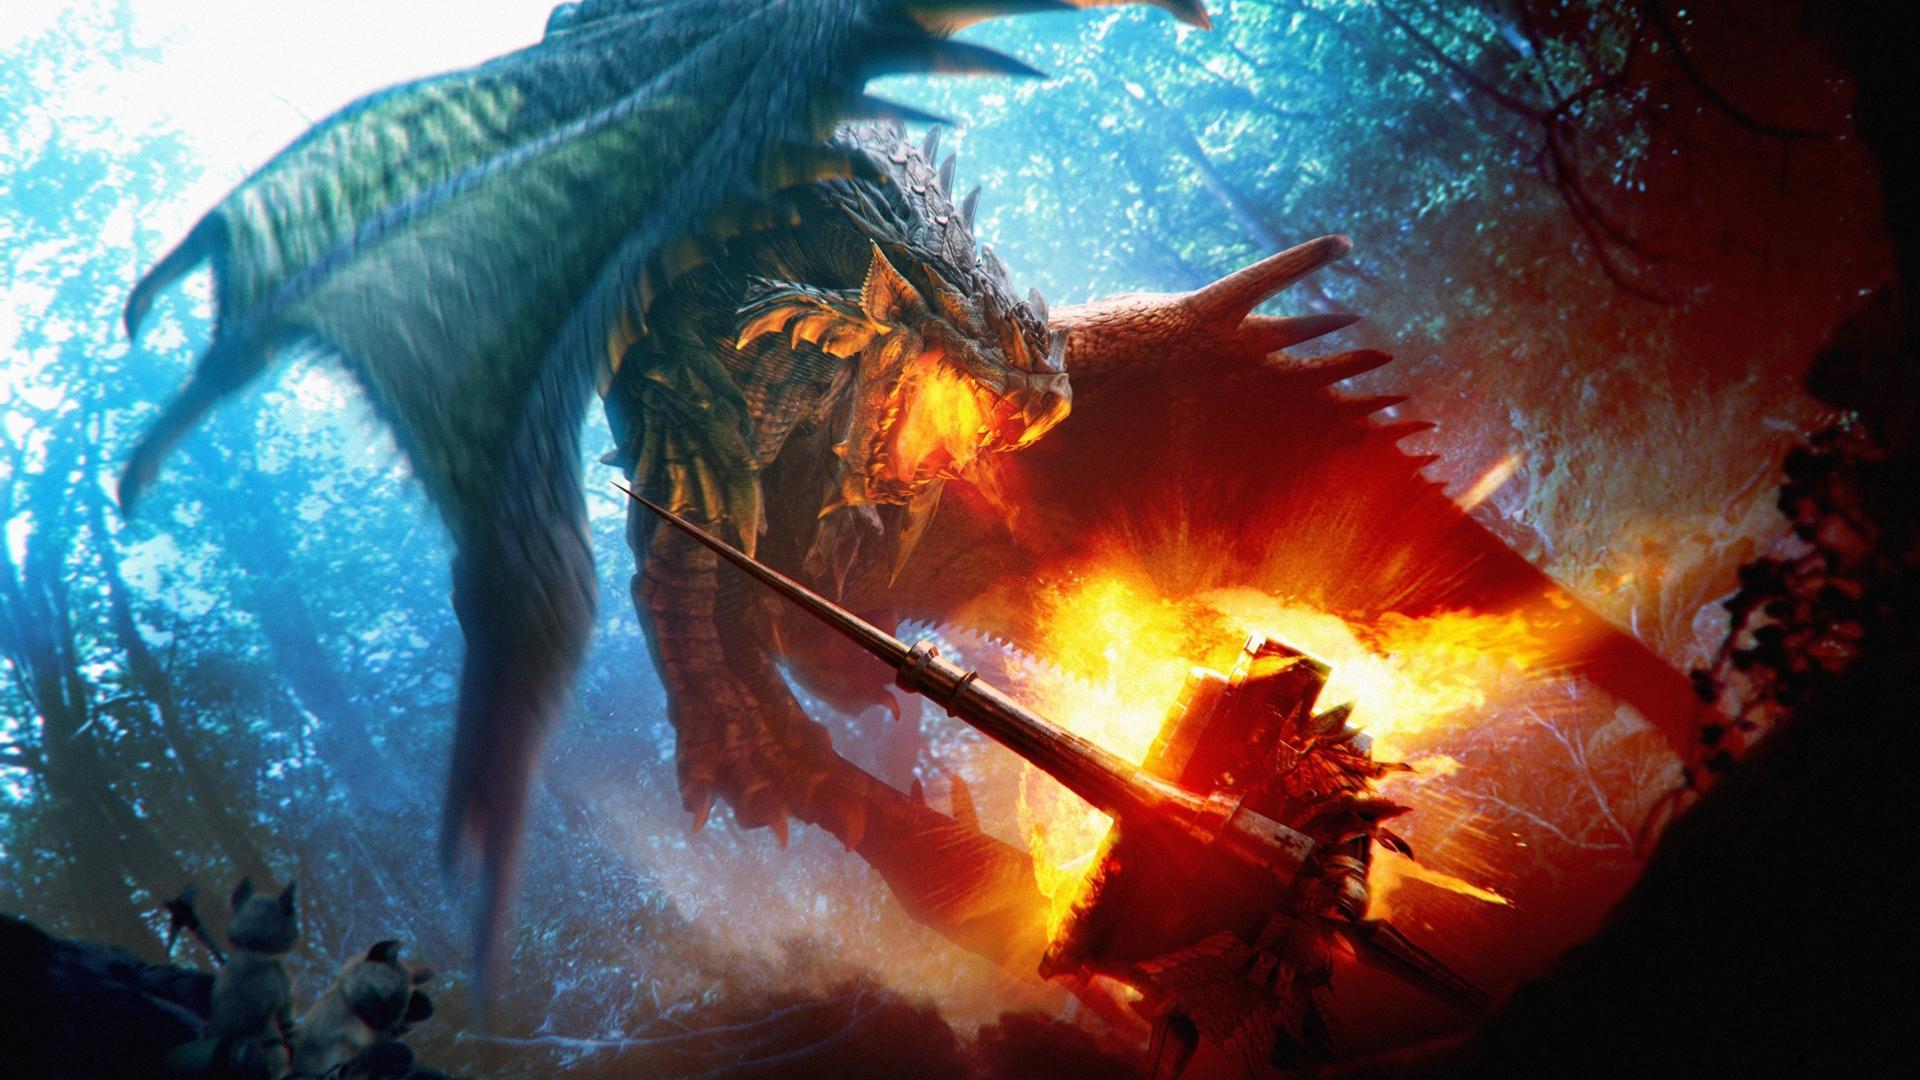 ) Download Rathalos Wallpaper For Free